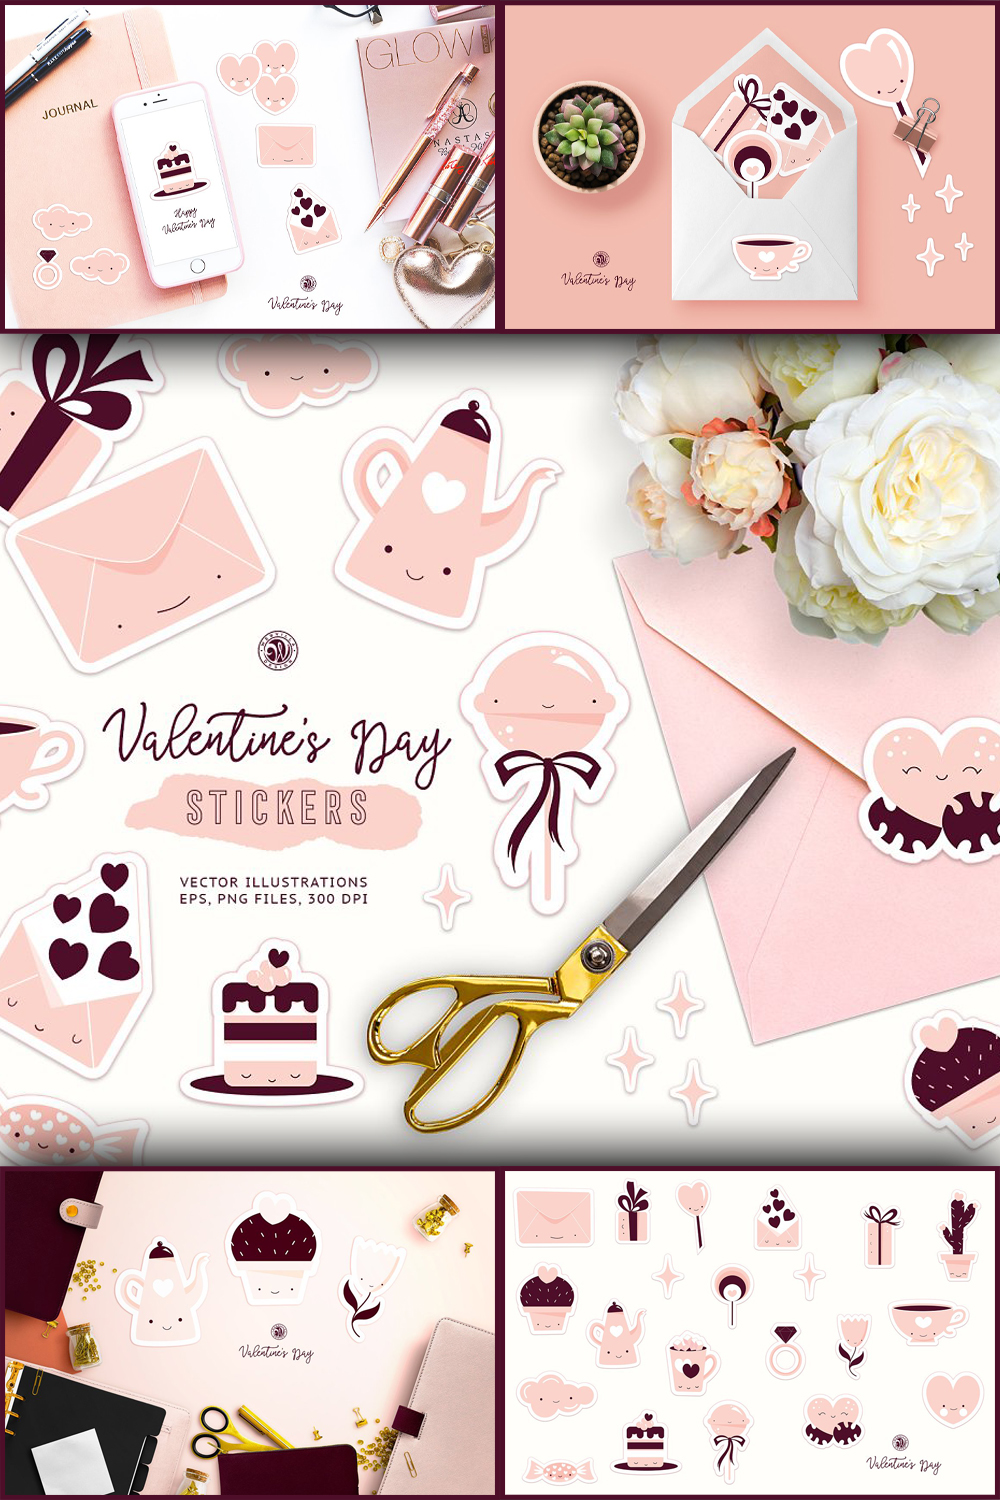 Cute valentines day stickers of pinterest.